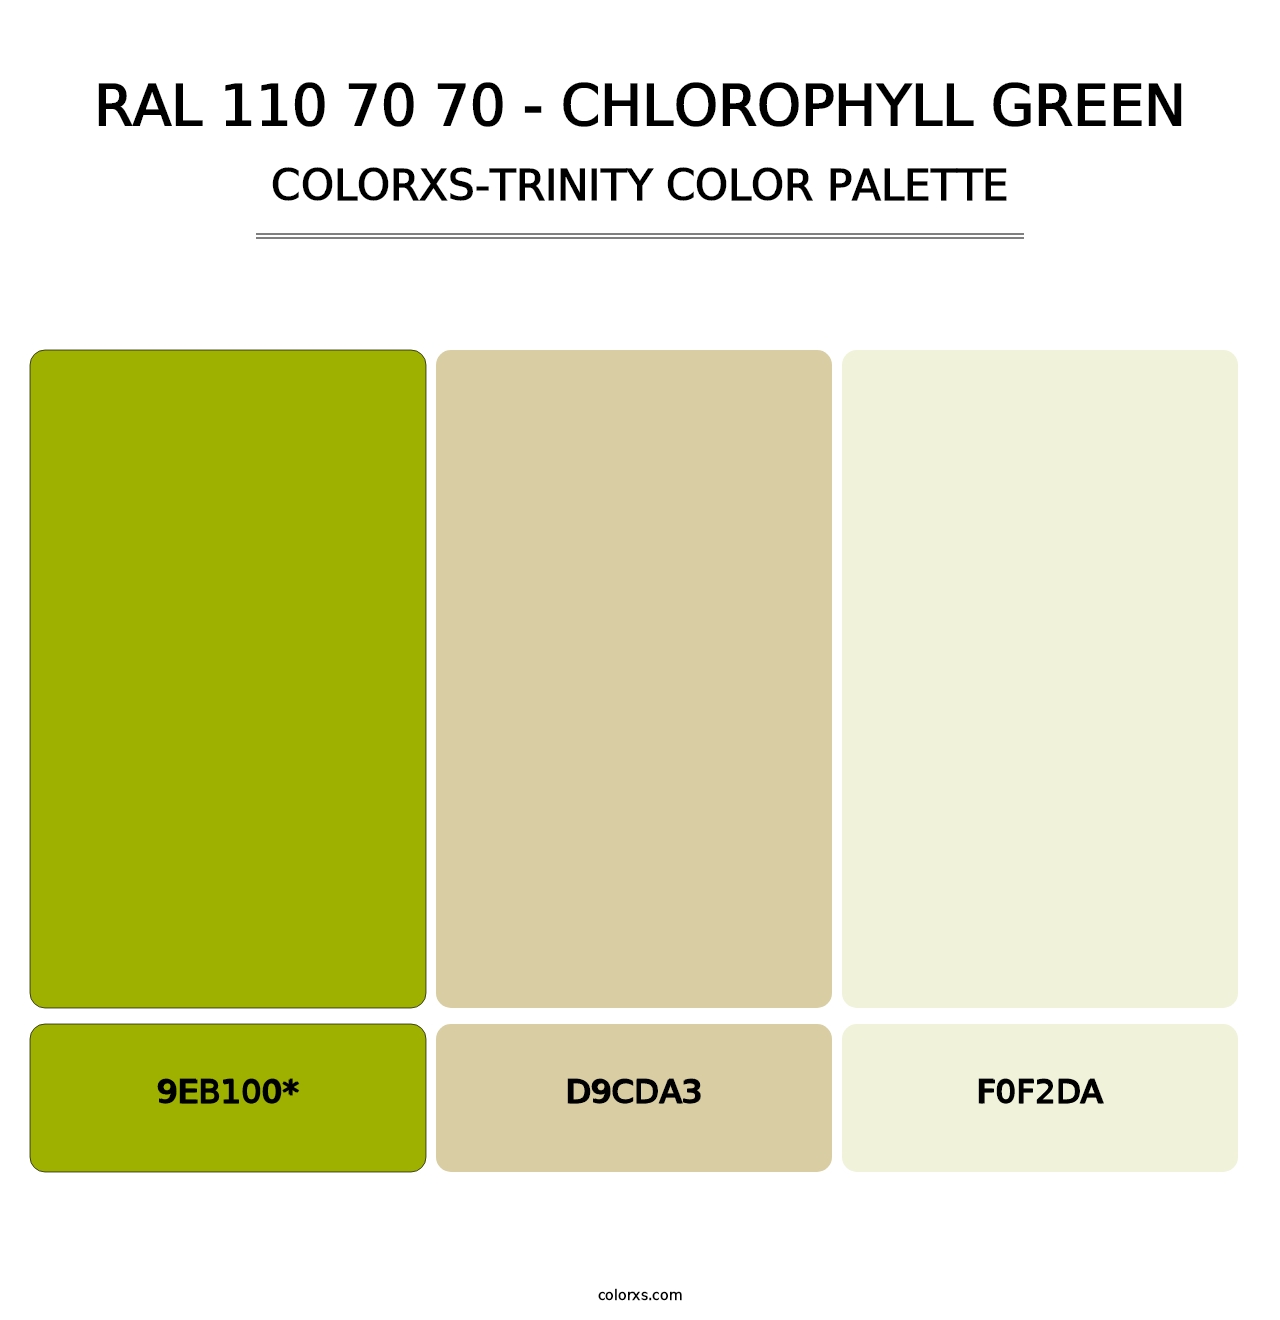 RAL 110 70 70 - Chlorophyll Green - Colorxs Trinity Palette